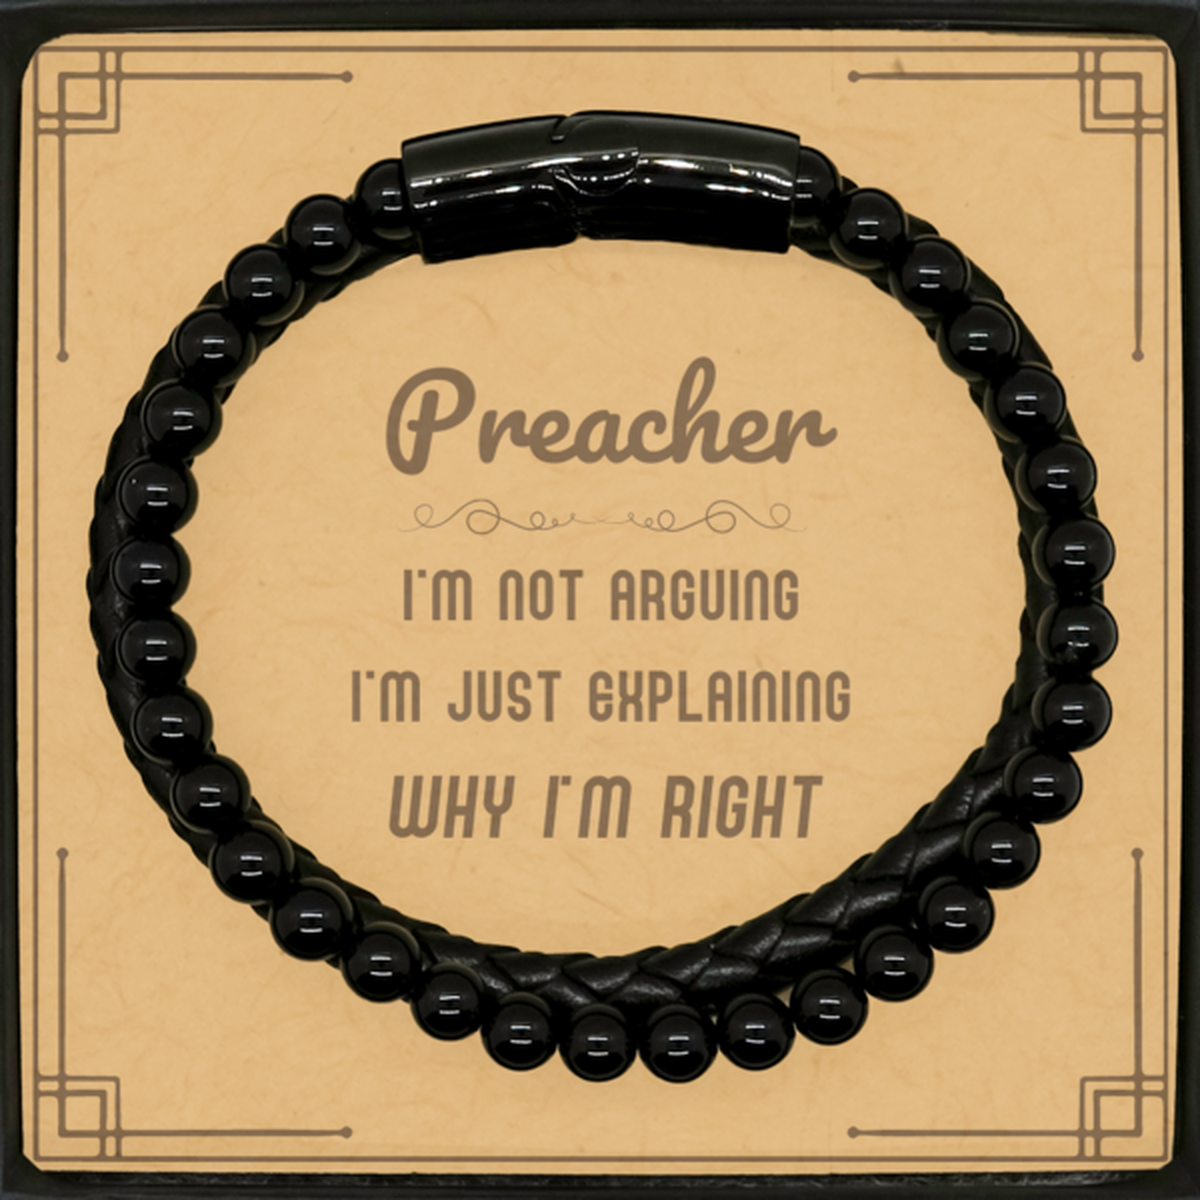 Preacher I'm not Arguing. I'm Just Explaining Why I'm RIGHT Stone Leather Bracelets, Funny Saying Quote Preacher Gifts For Preacher Message Card Graduation Birthday Christmas Gifts for Men Women Coworker